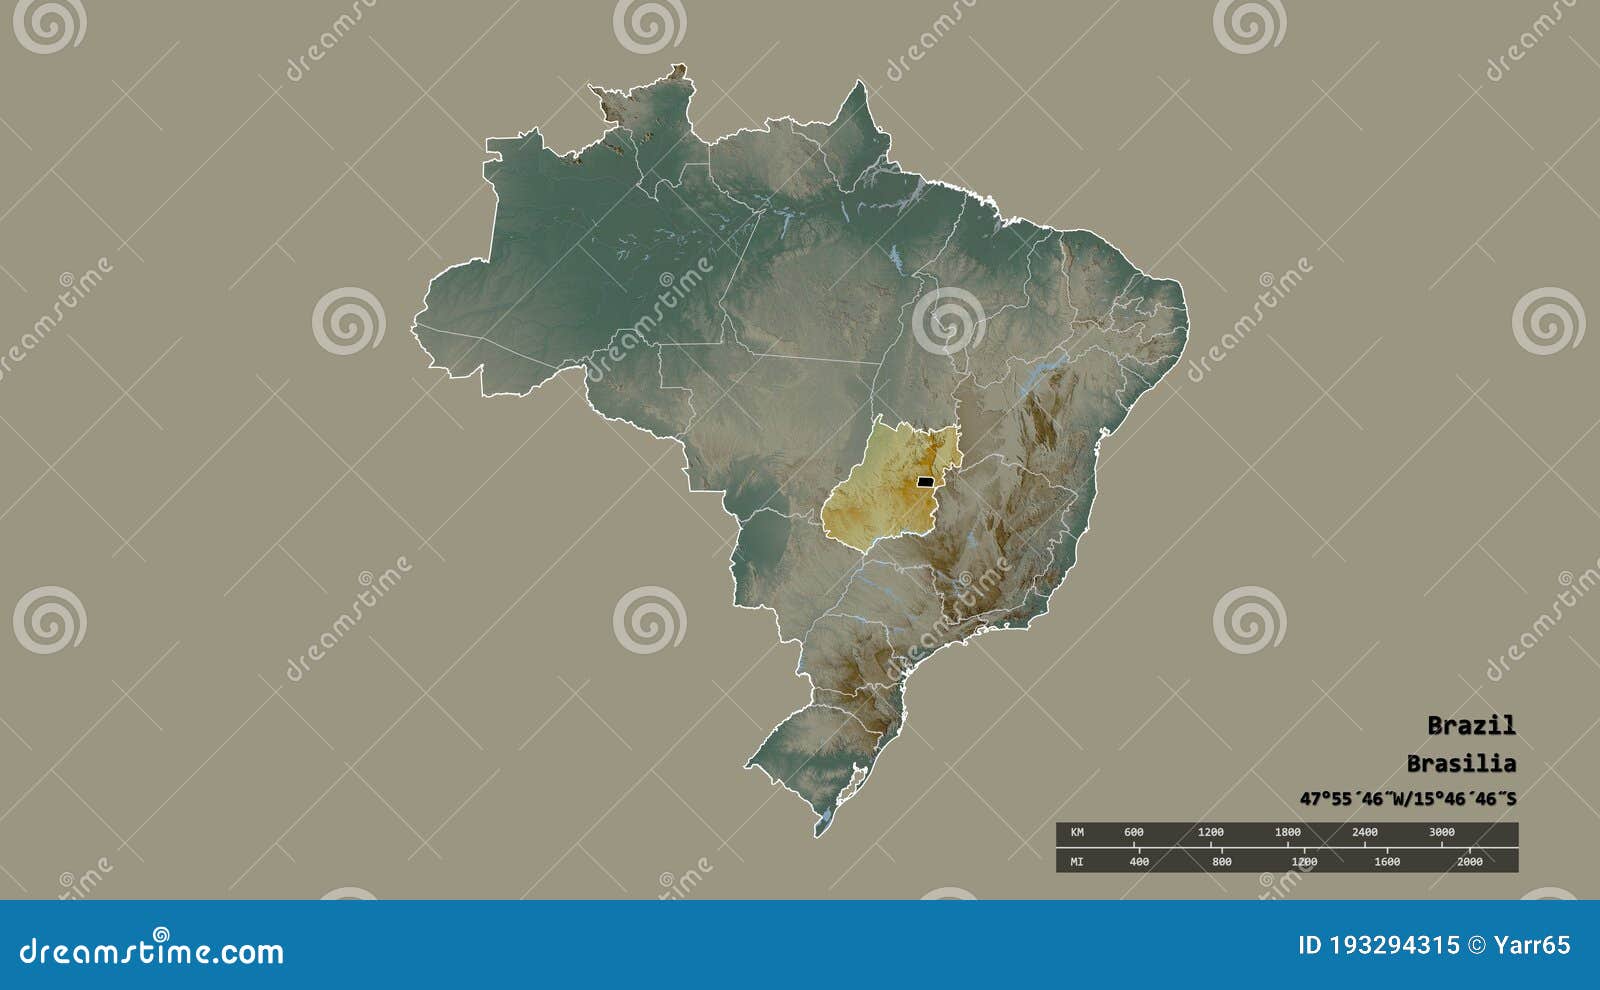 https://thumbs.dreamstime.com/z/desaturated-shape-brazil-its-capital-main-regional-division-separated-goi%C3%A1s-area-labels-topographic-relief-map-d-193294315.jpg